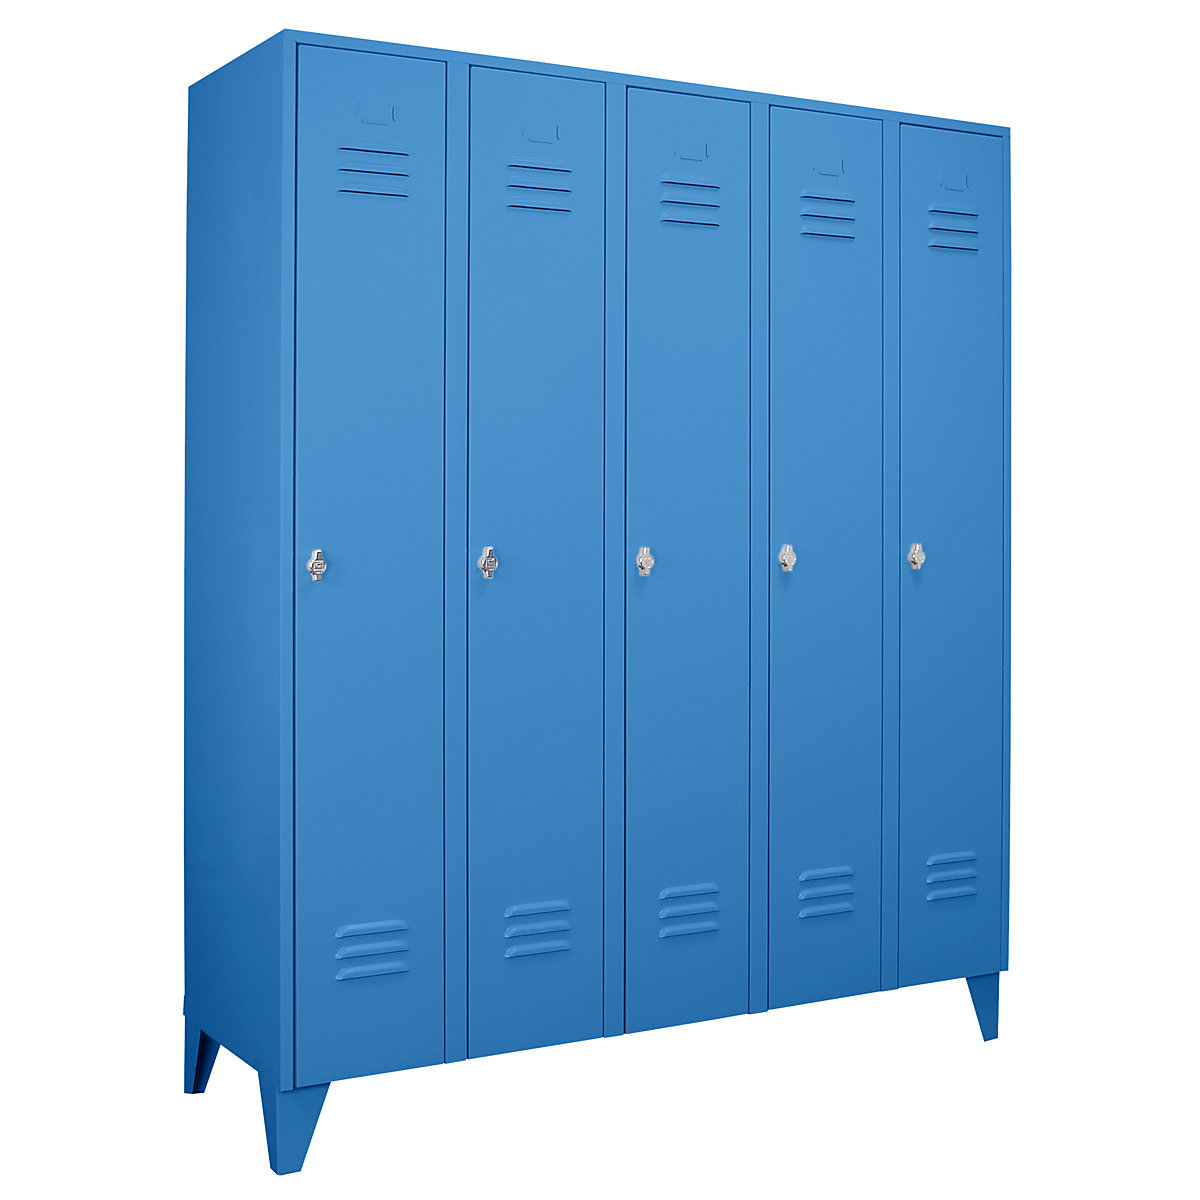 Steel locker with stud feet – Wolf, full height compartments, solid doors, compartment width 300 mm, 5 compartments, light blue-8